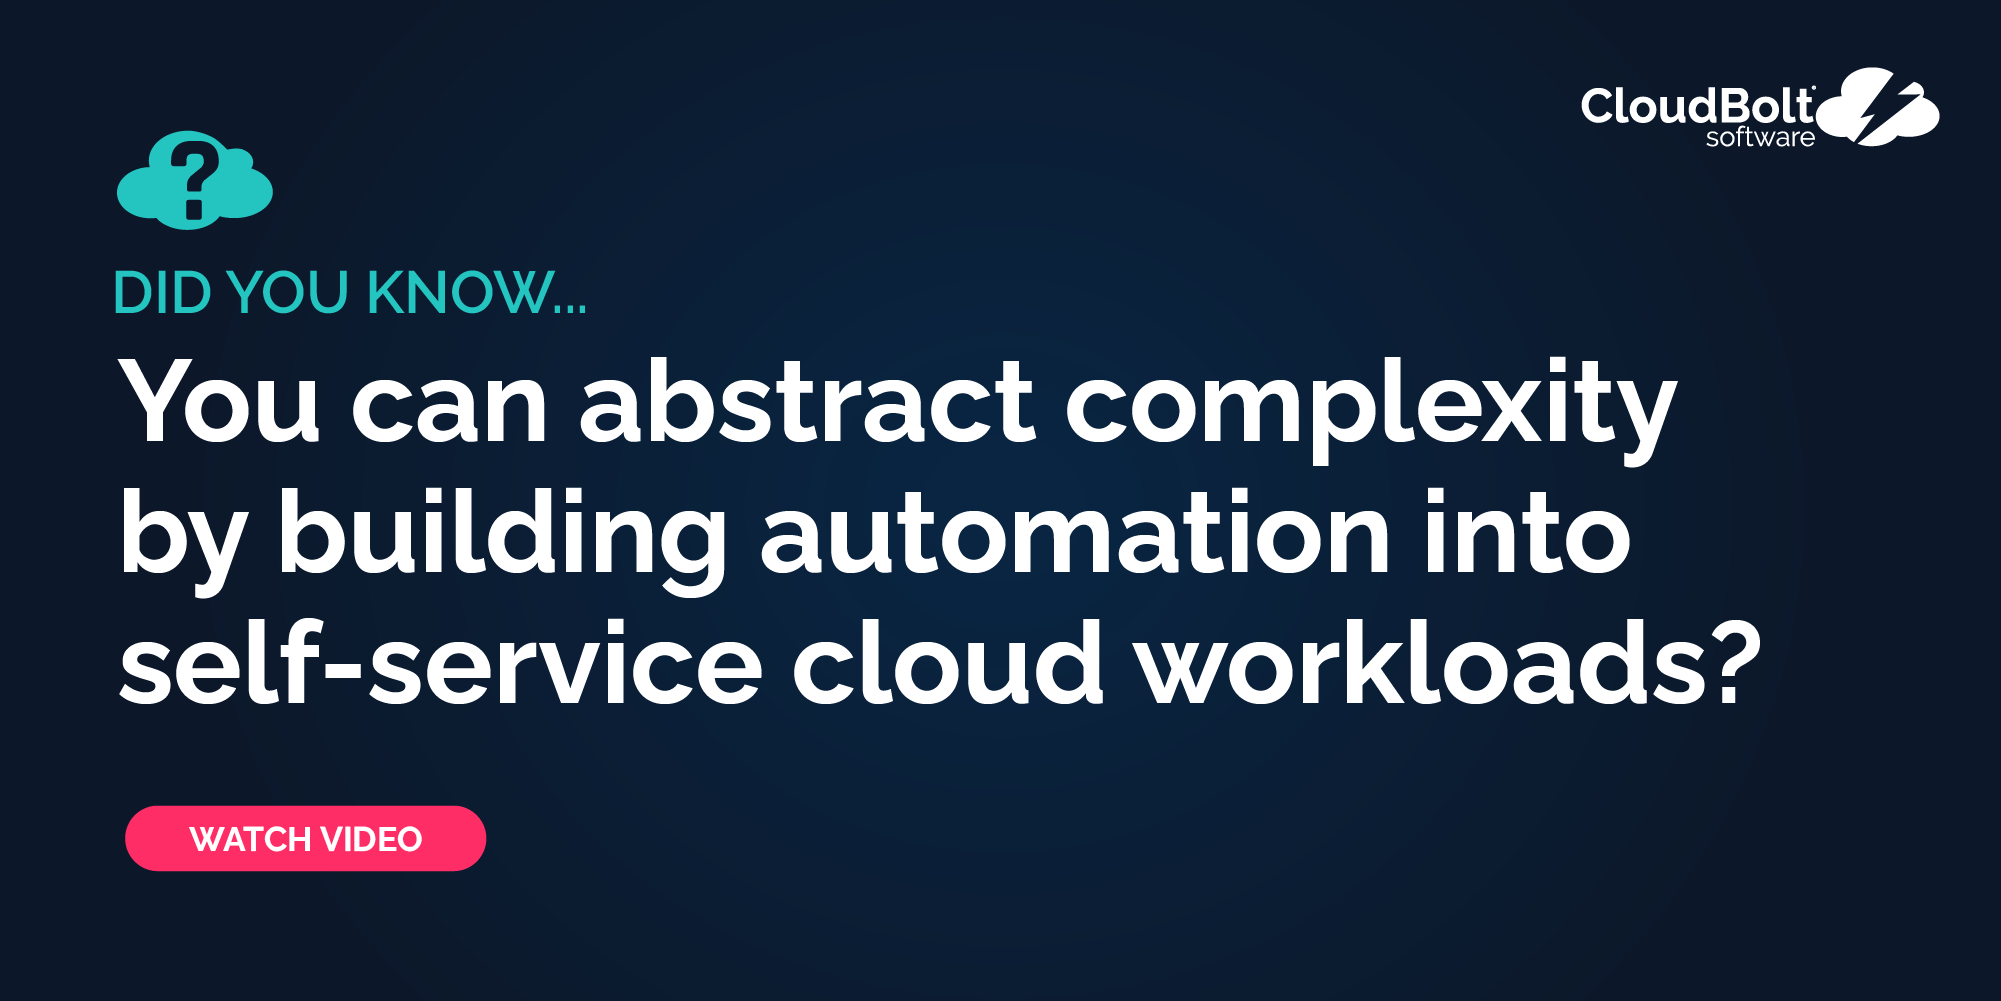 Did you know... you can build automation into workloads?